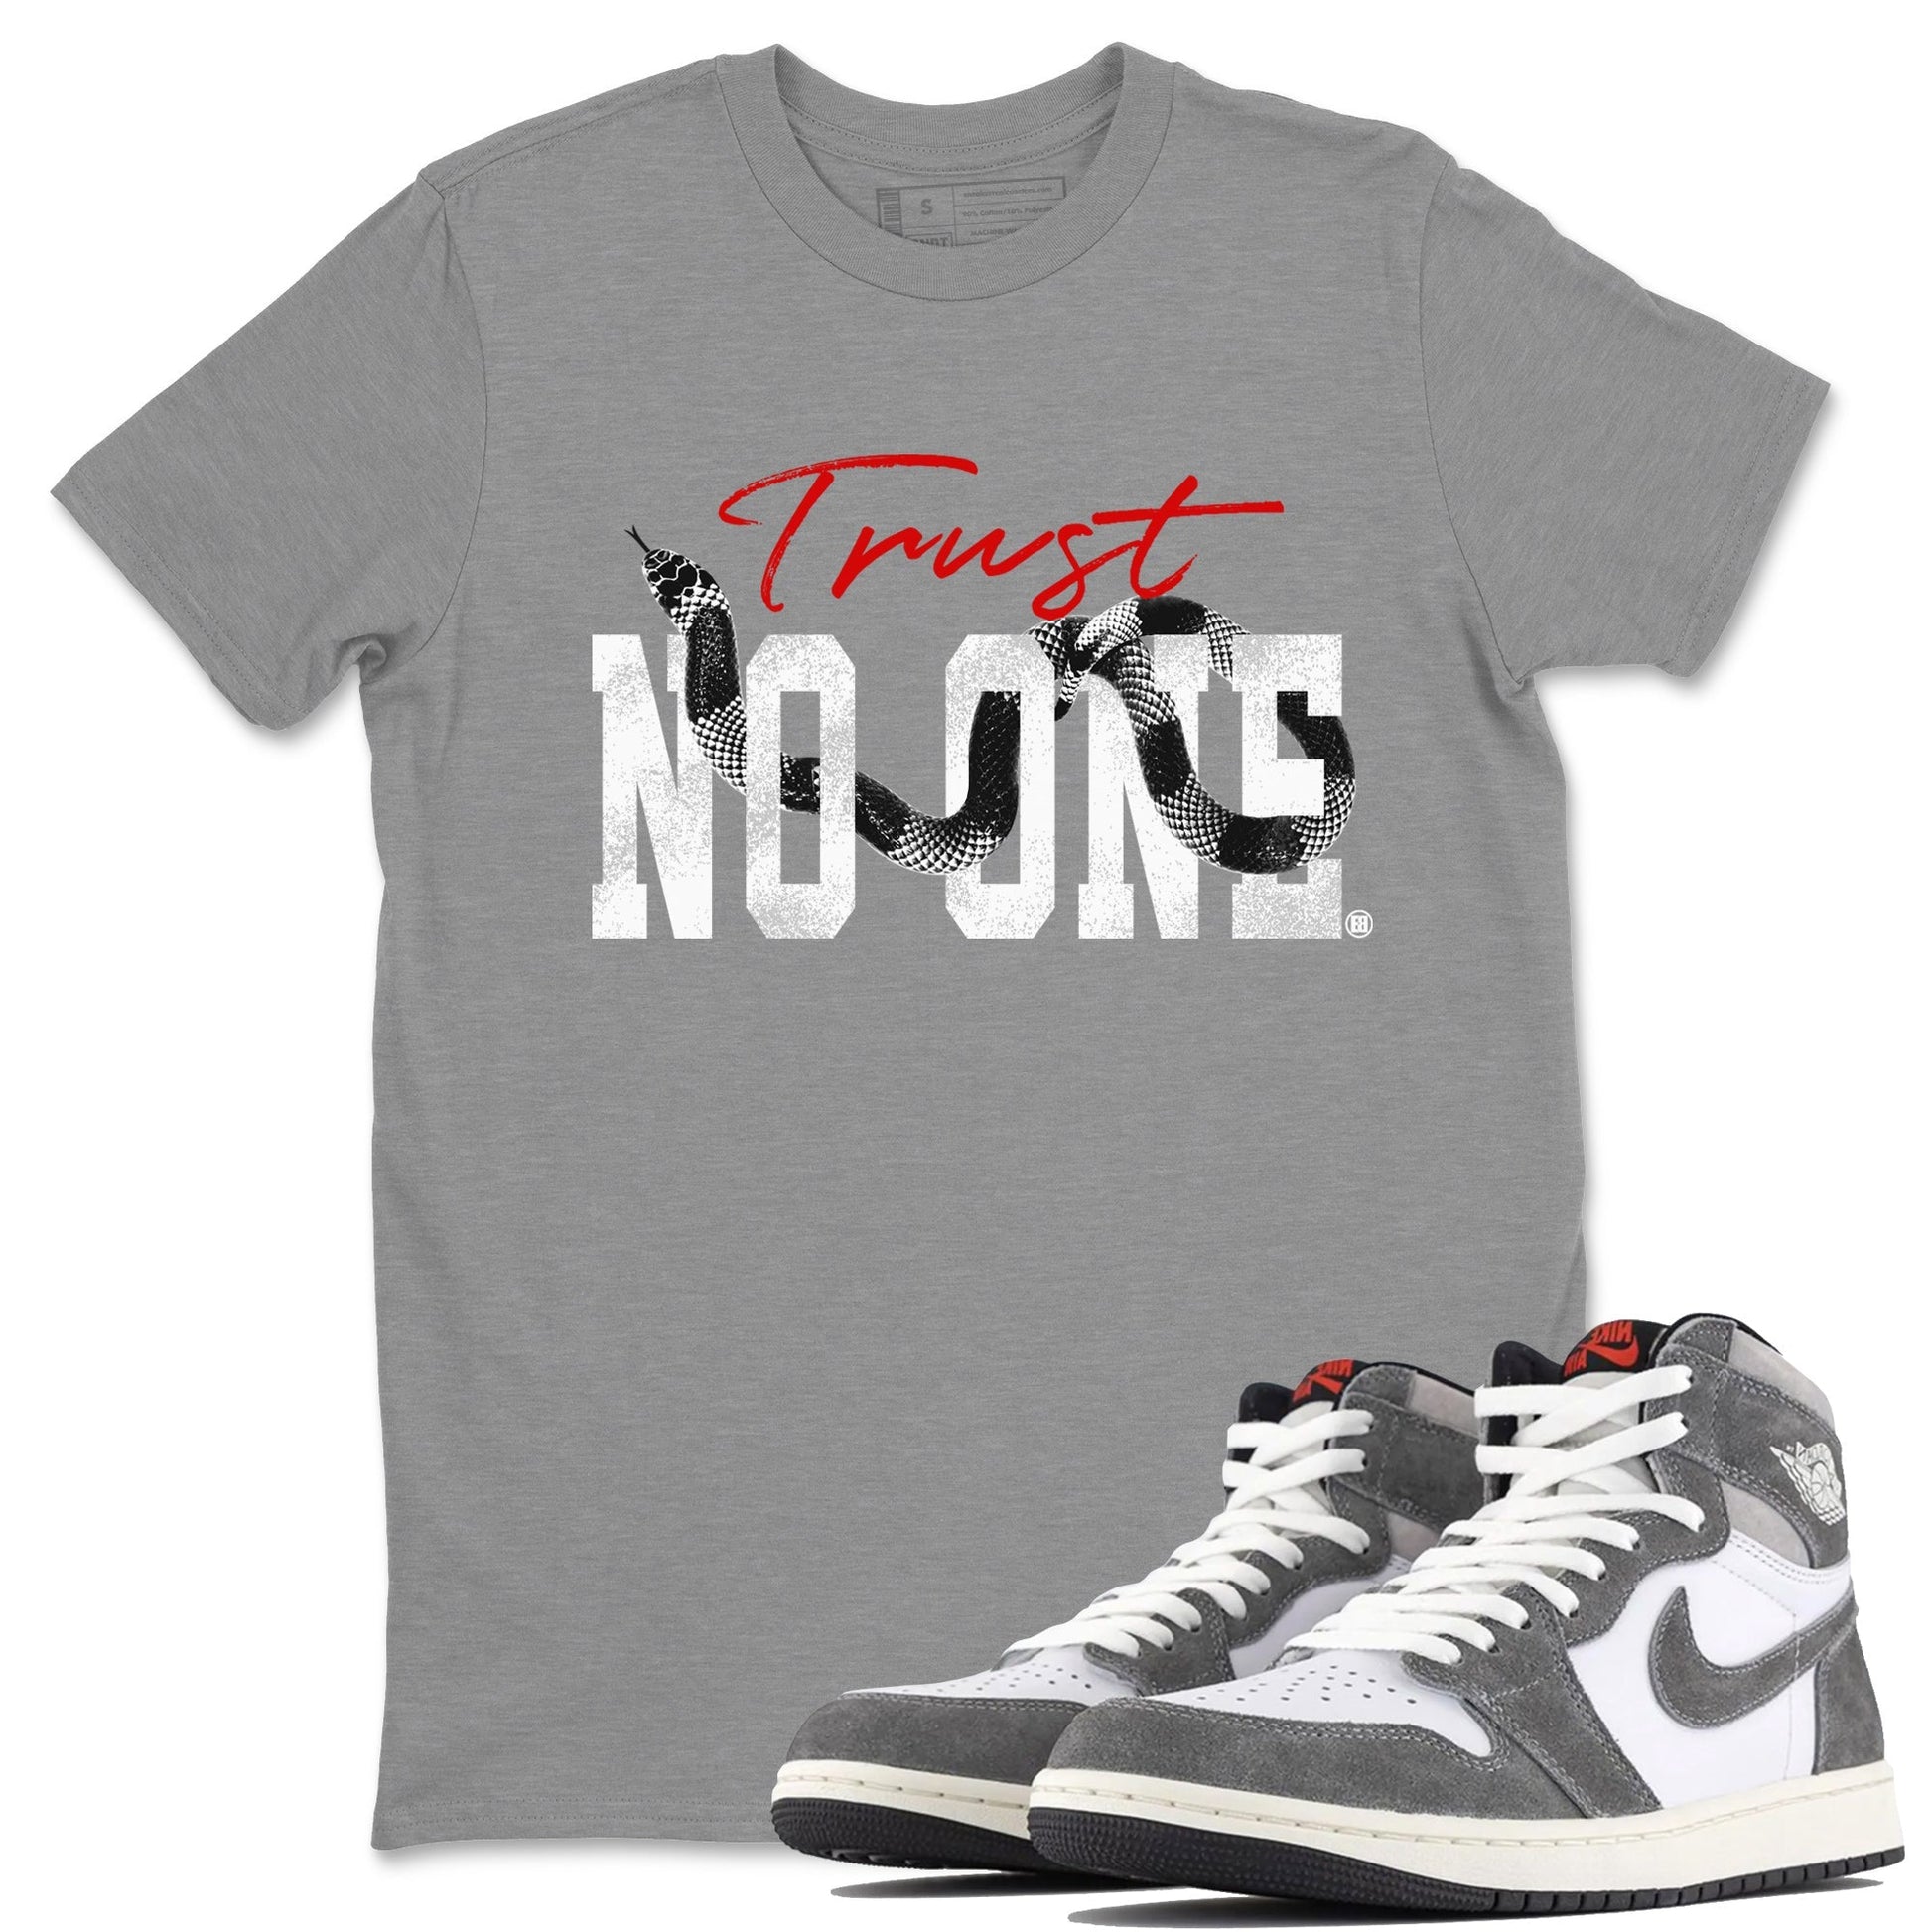 Air Jordan 1 Washed Heritage Trust No One Crew Neck Sneaker Tees Air Jordan 1 Washed Heritage Sneaker T-Shirts Size Chart